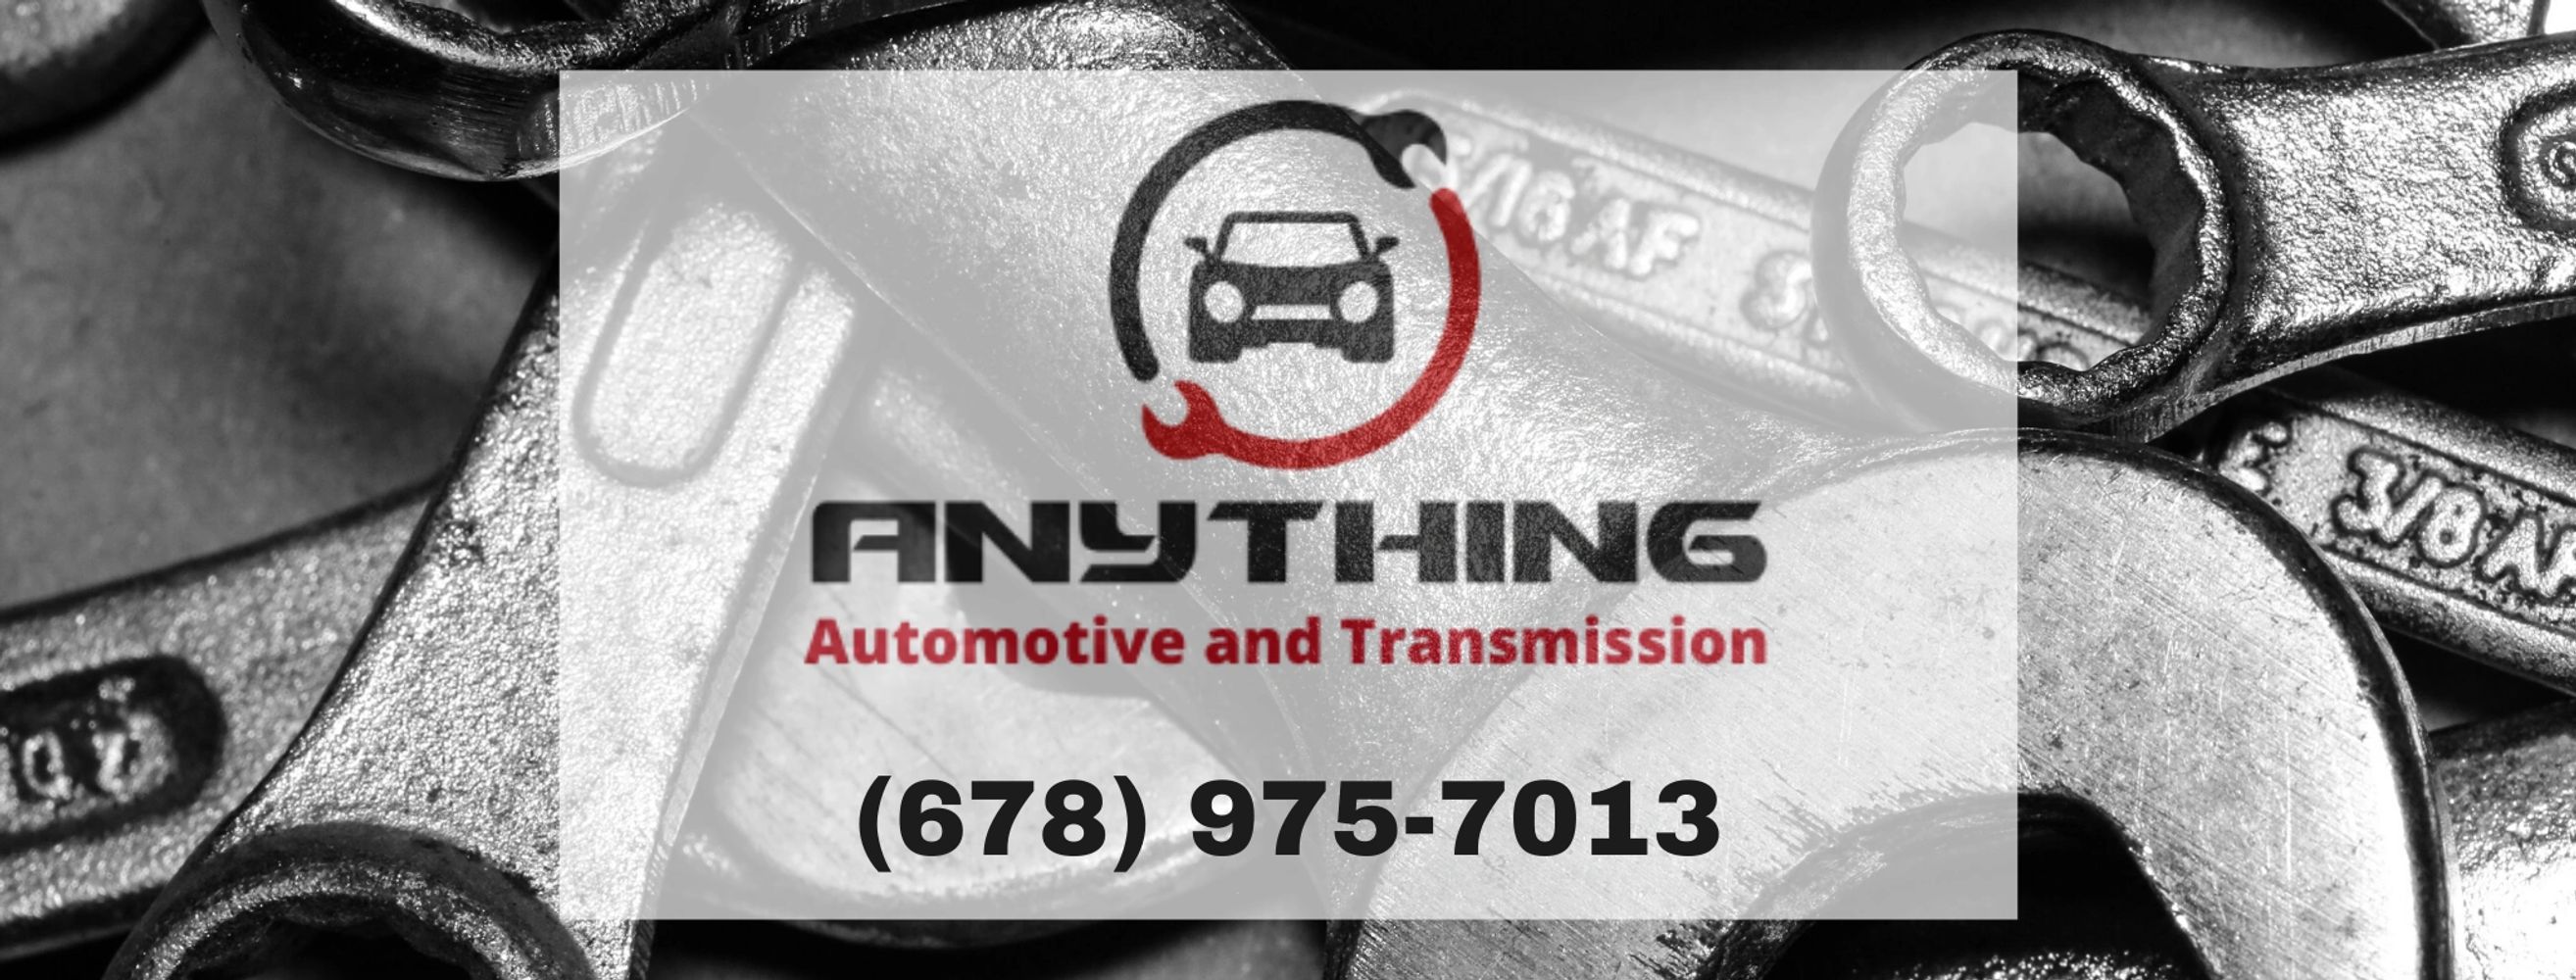 Auto shop anything automotive and transmission braselton ga car repair oil  change engine service